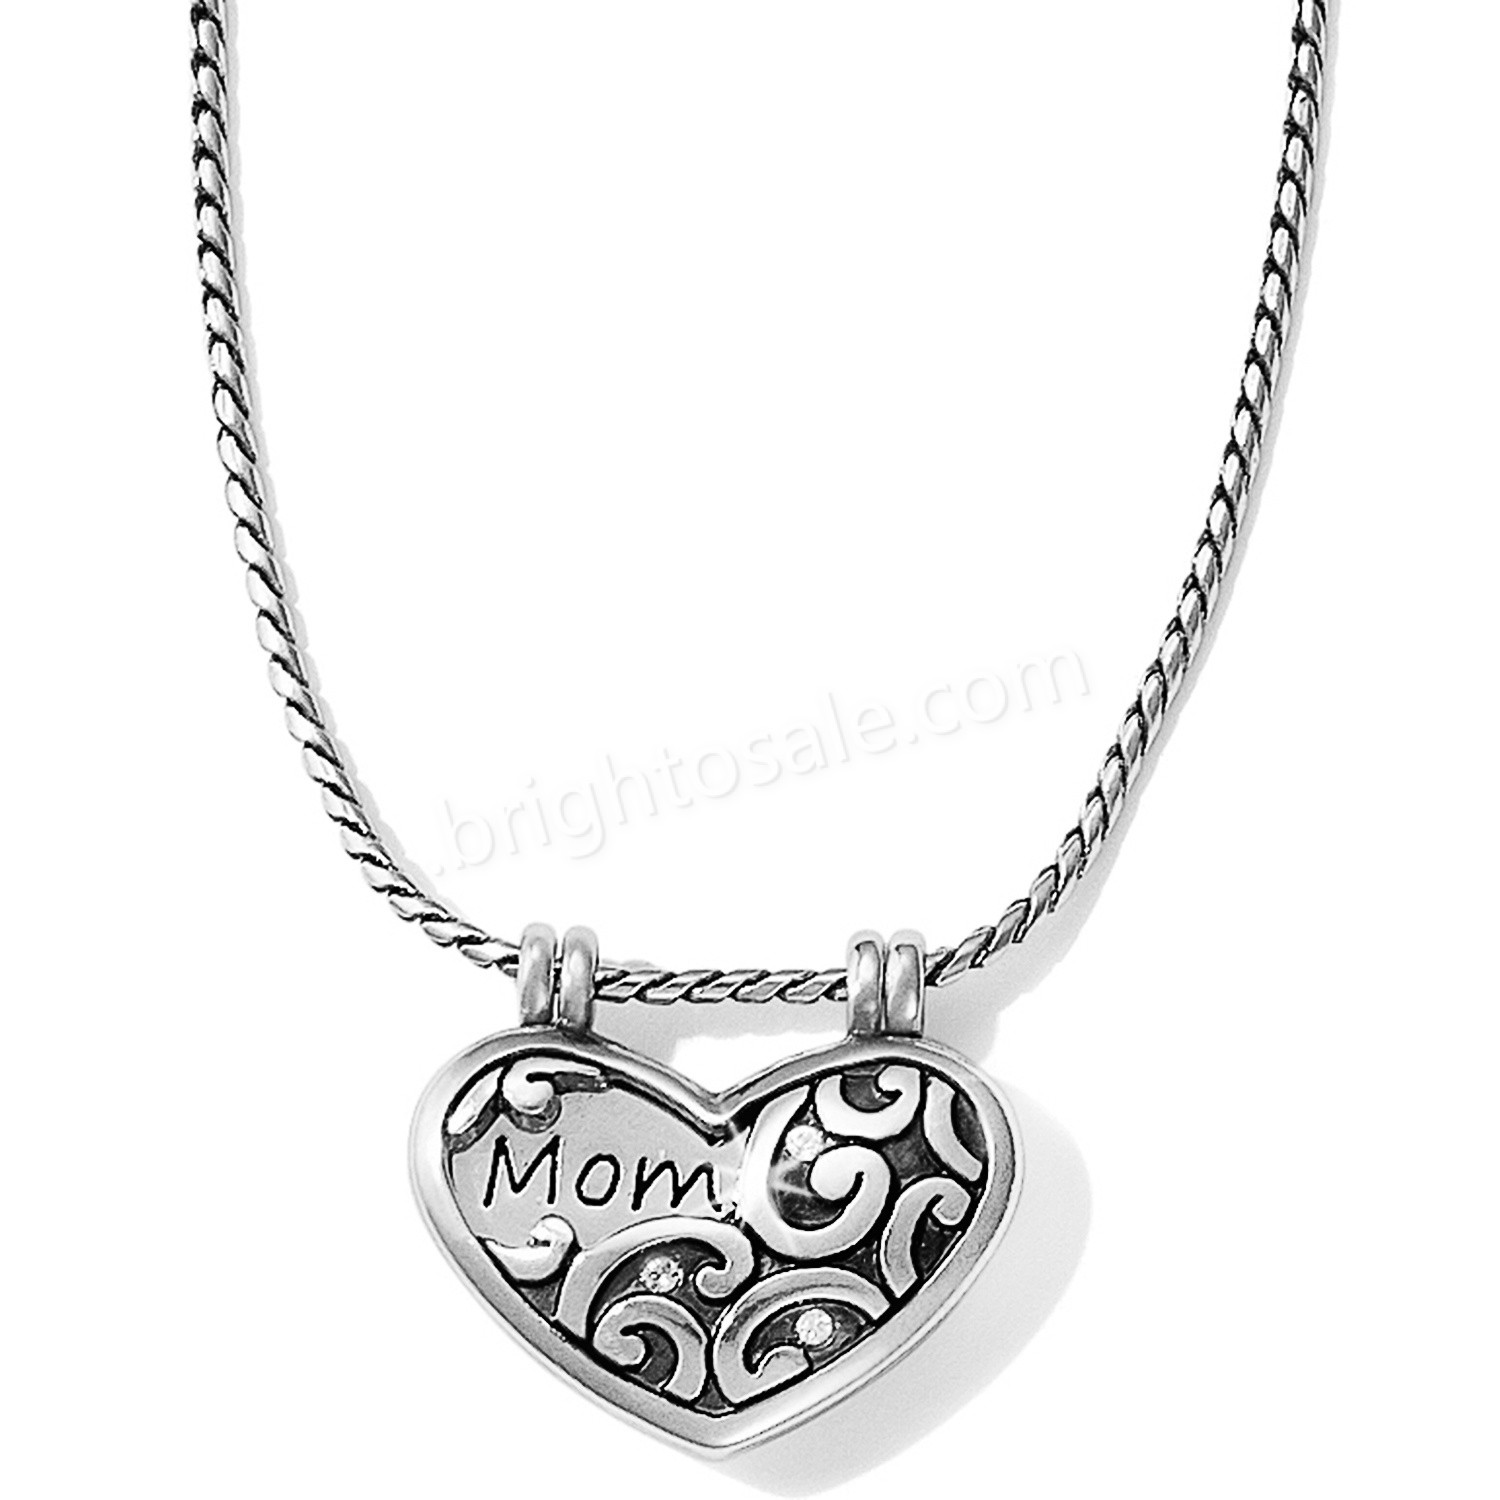 Brighton Collectibles & Online Discount Mom Is Queen Necklace - Brighton Collectibles & Online Discount Mom Is Queen Necklace